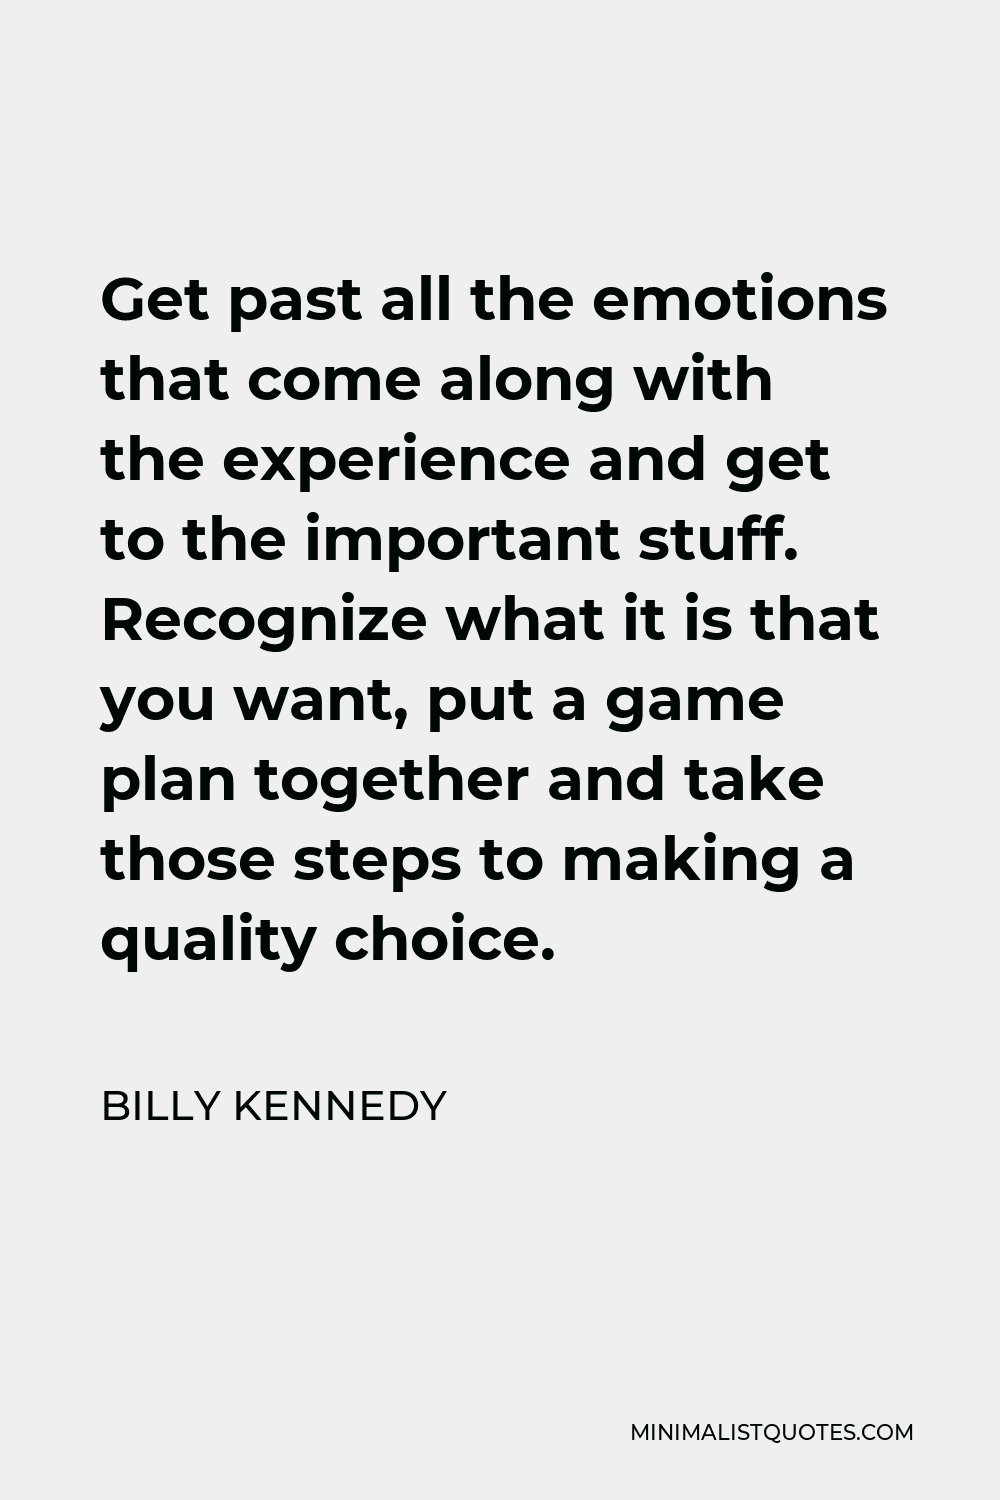 Billy Kennedy Quote - Get past all the emotions that come along with the experience and get to the important stuff. Recognize what it is that you want, put a game plan together and take those steps to making a quality choice.